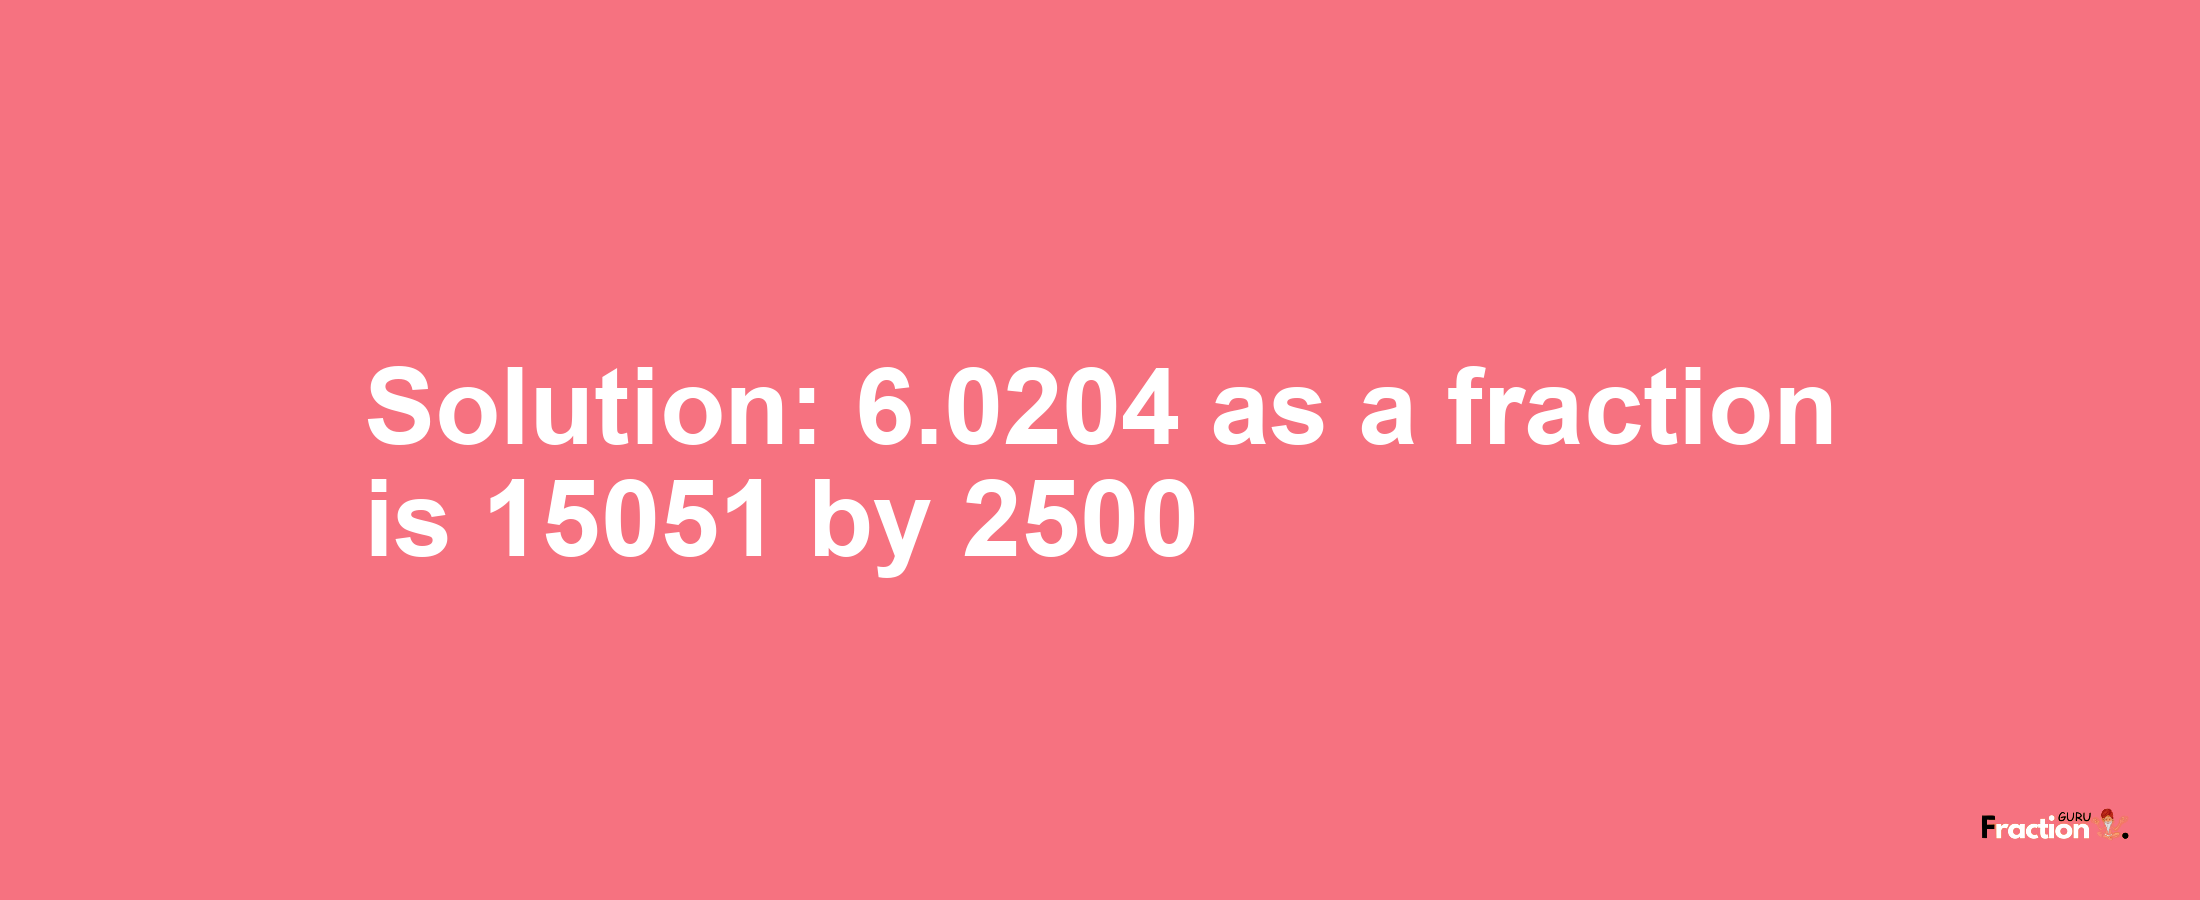 Solution:6.0204 as a fraction is 15051/2500